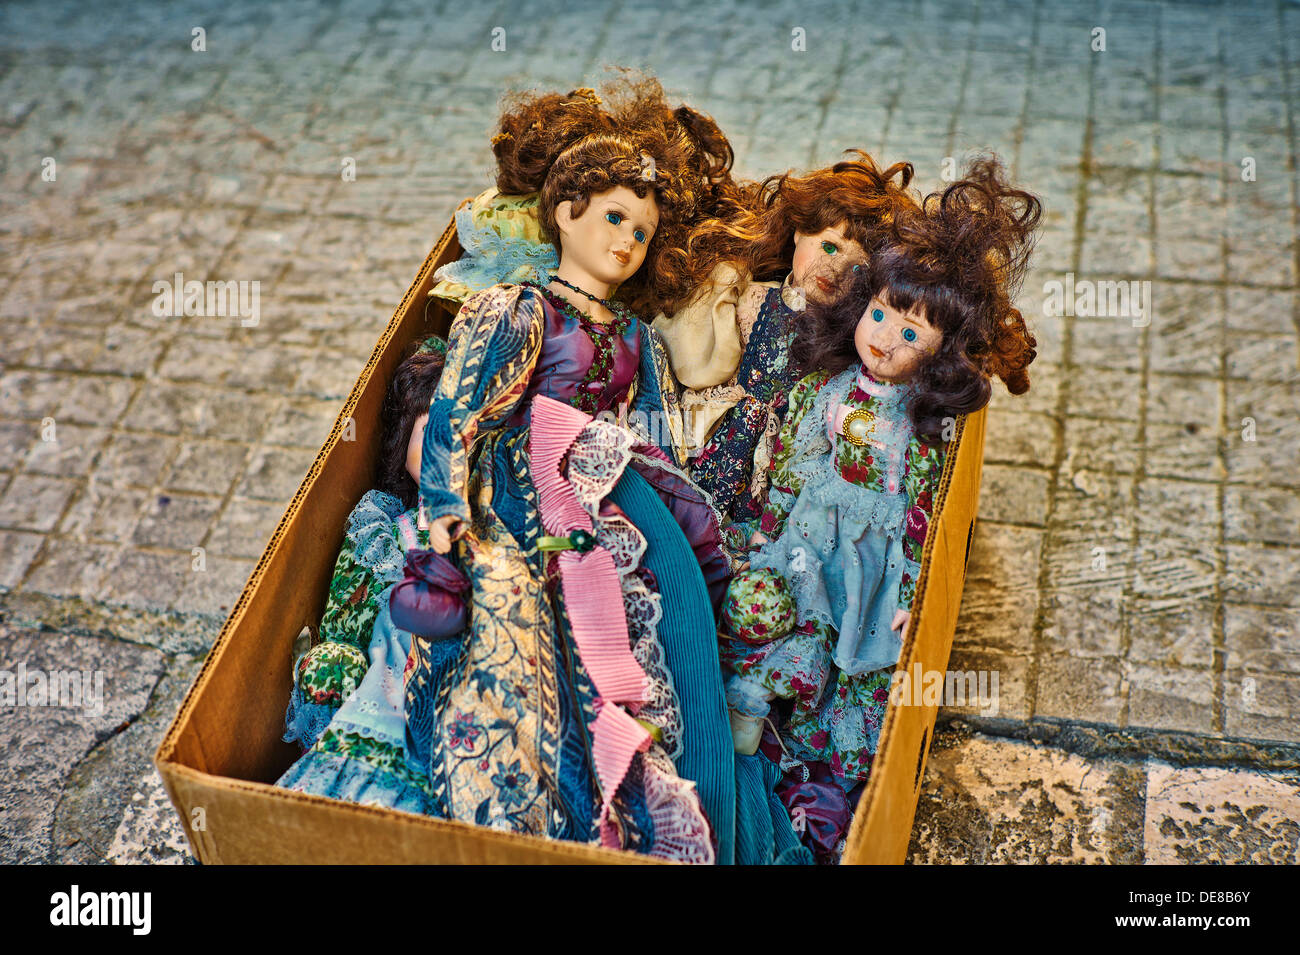 Italy, Apulia, Old Puppets on peddlers market Stock Photo